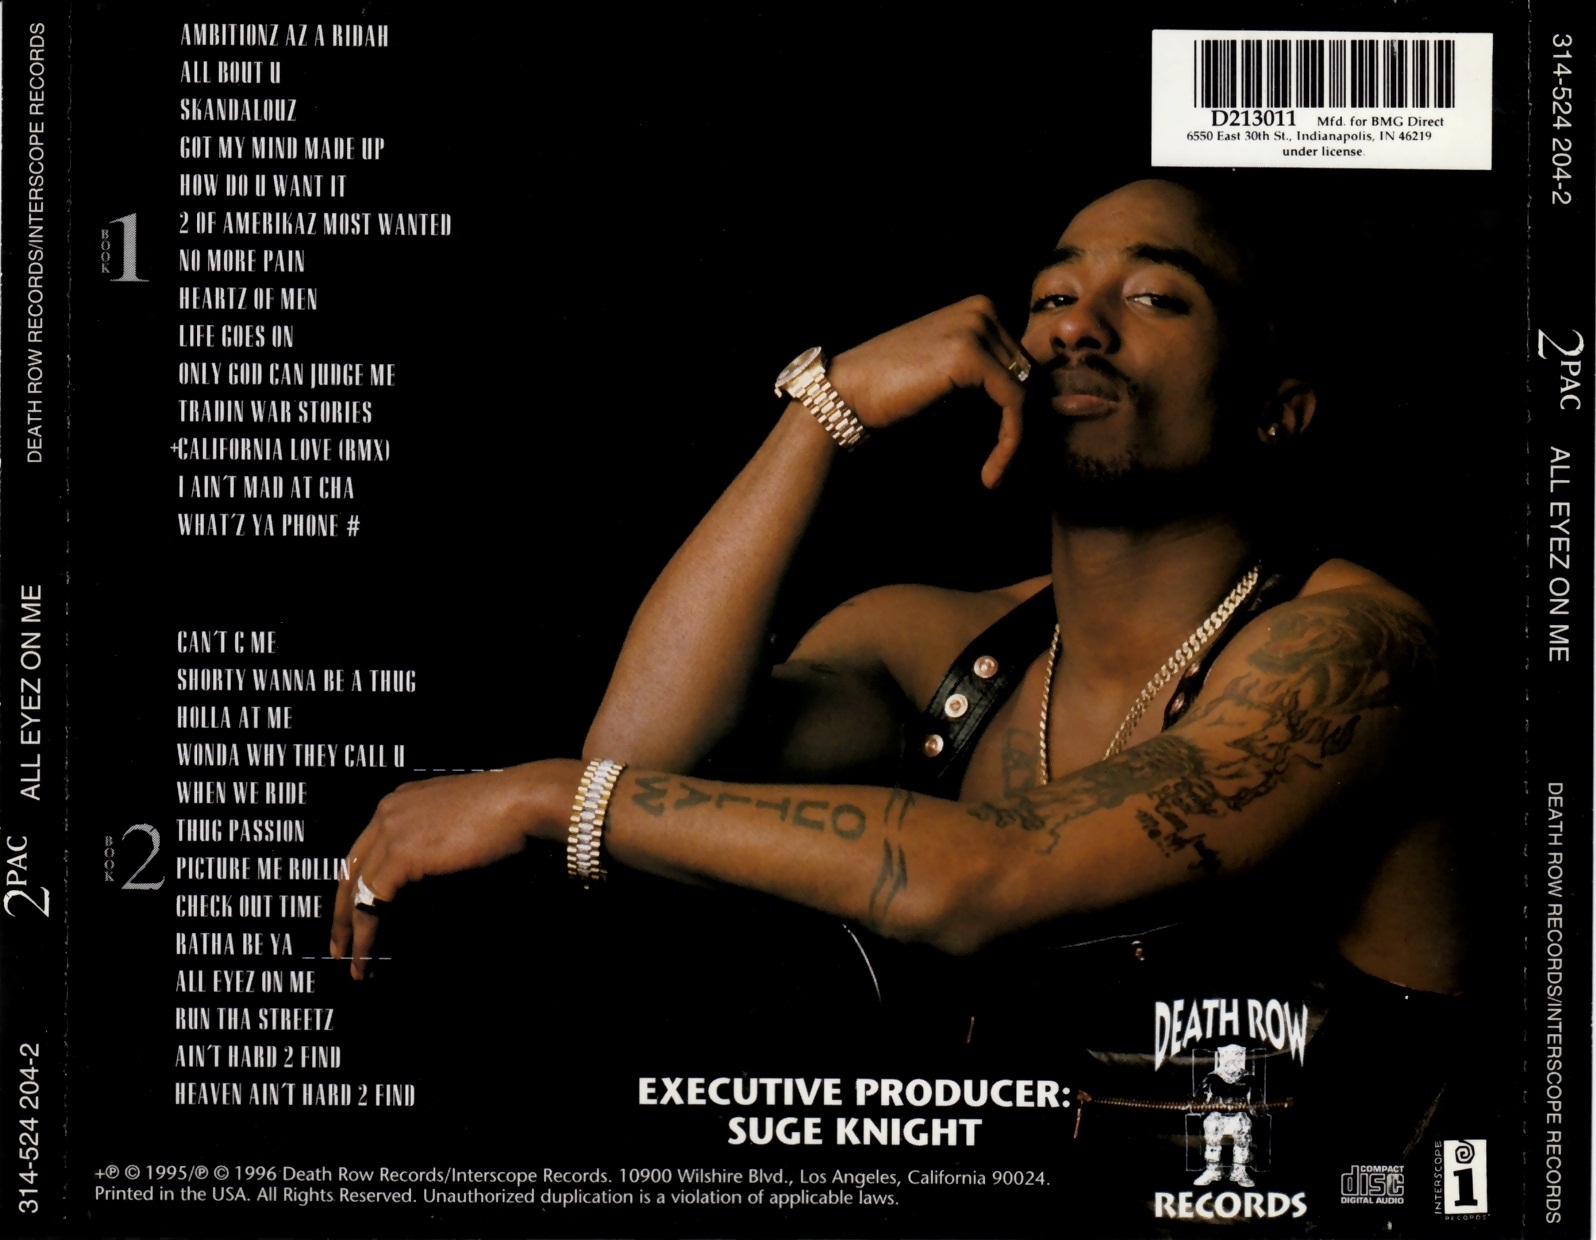 highest-level-of-music-2pac-all-eyez-on-me-retail-2cd-1996